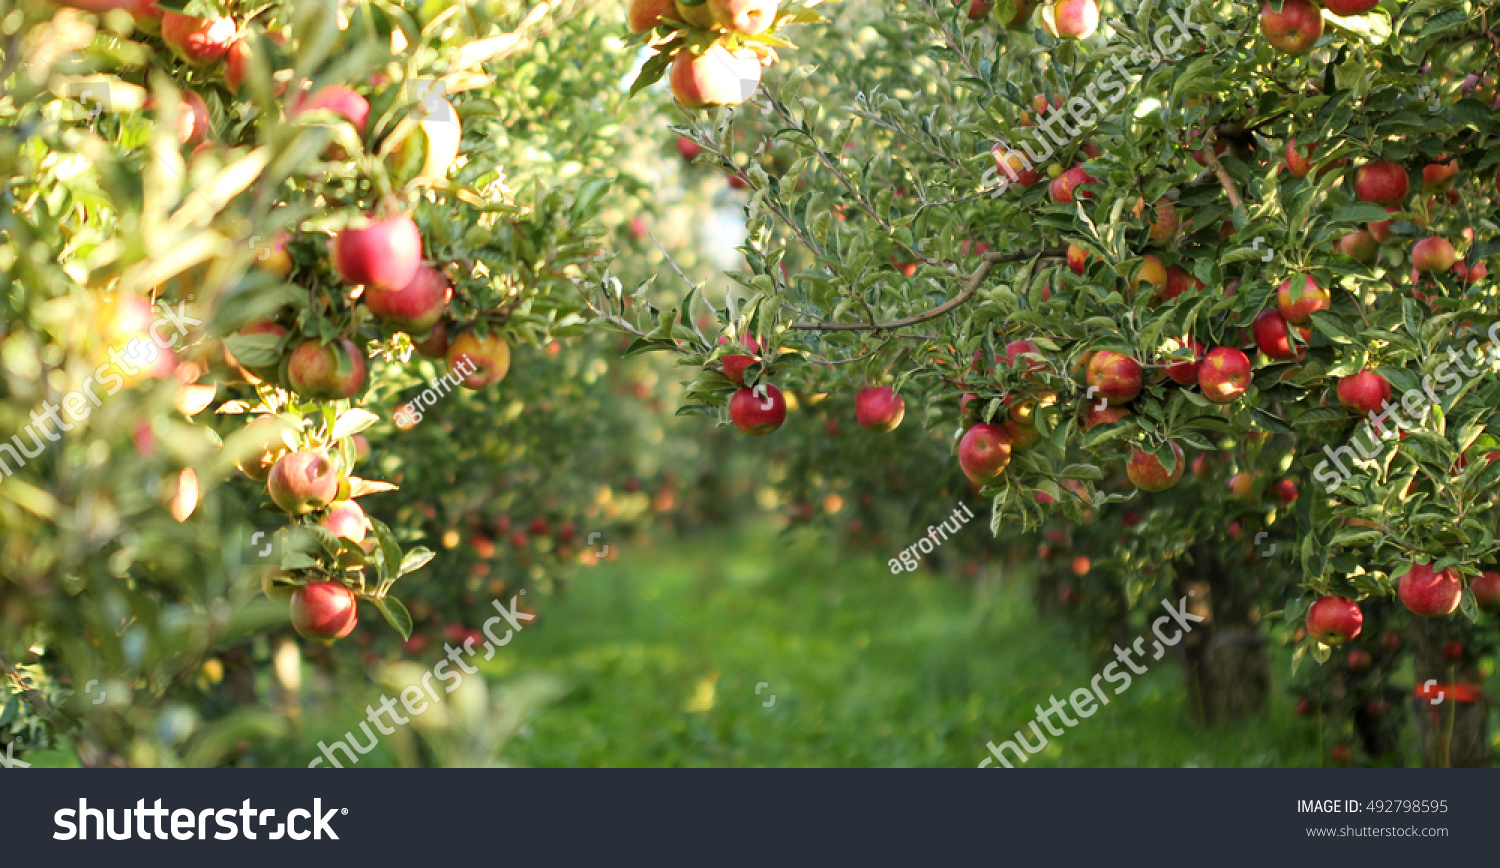 stock-photo-picture-of-a-ripe-apples-in-